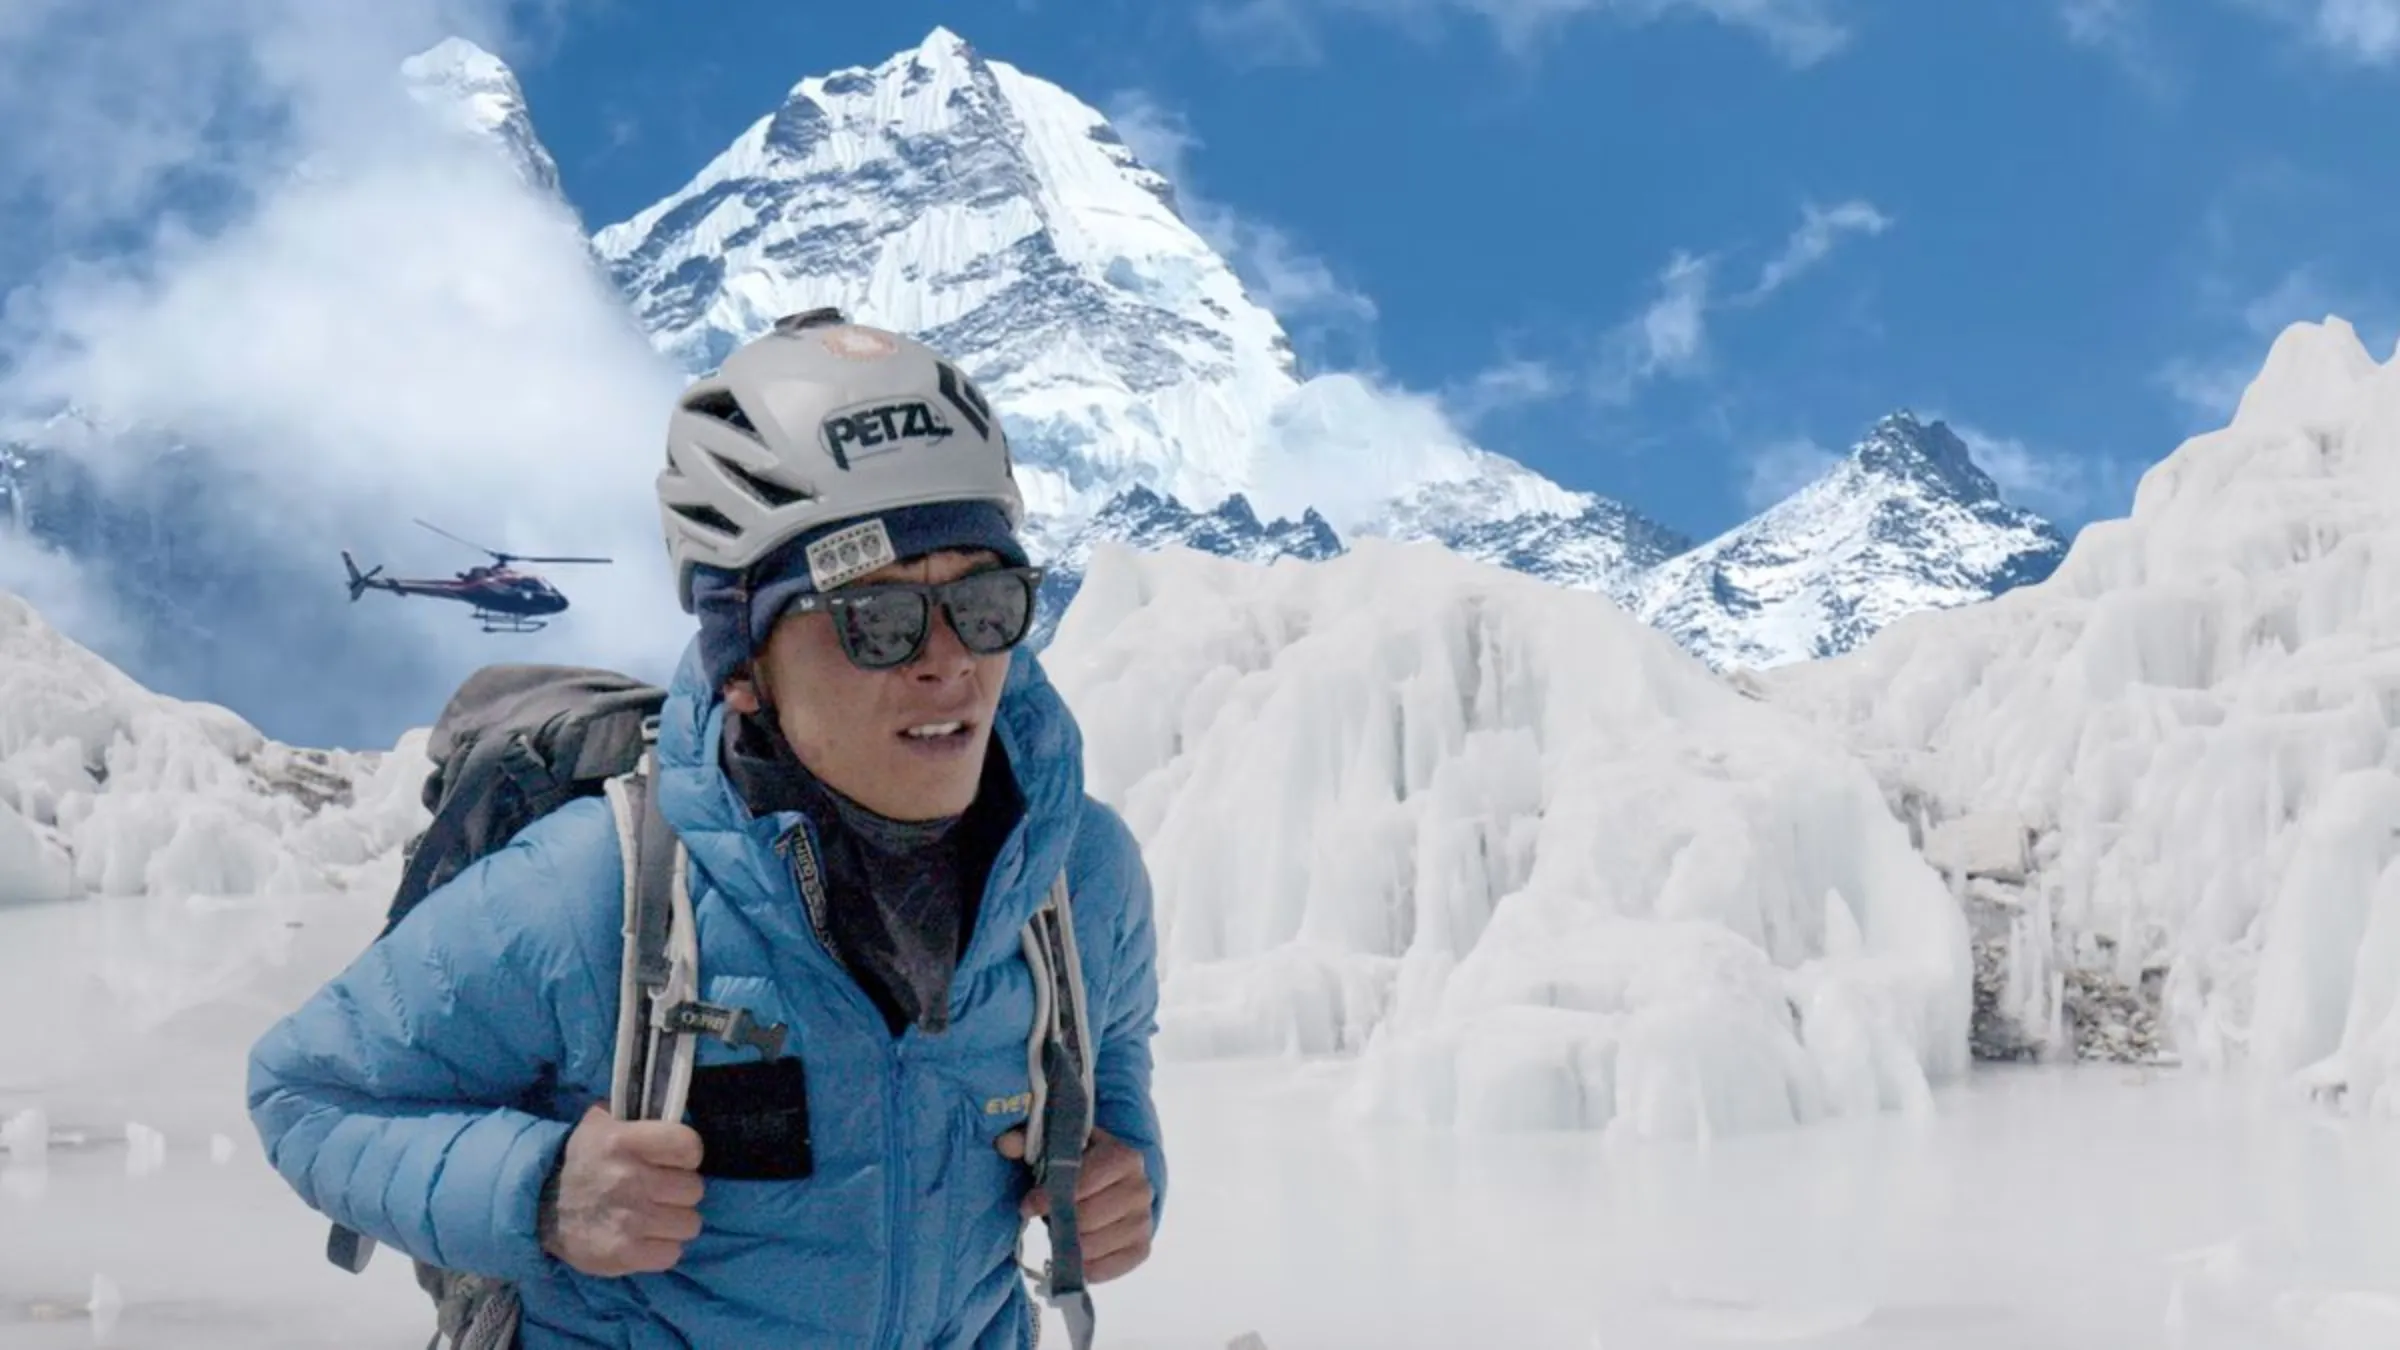 An icefall doctor, whose job is to make the climbing routes as safest as possible, stands in front of the the Khumbu Icefalls glaciers on the Mount Everest as a helicopter flies in the background, in this video still